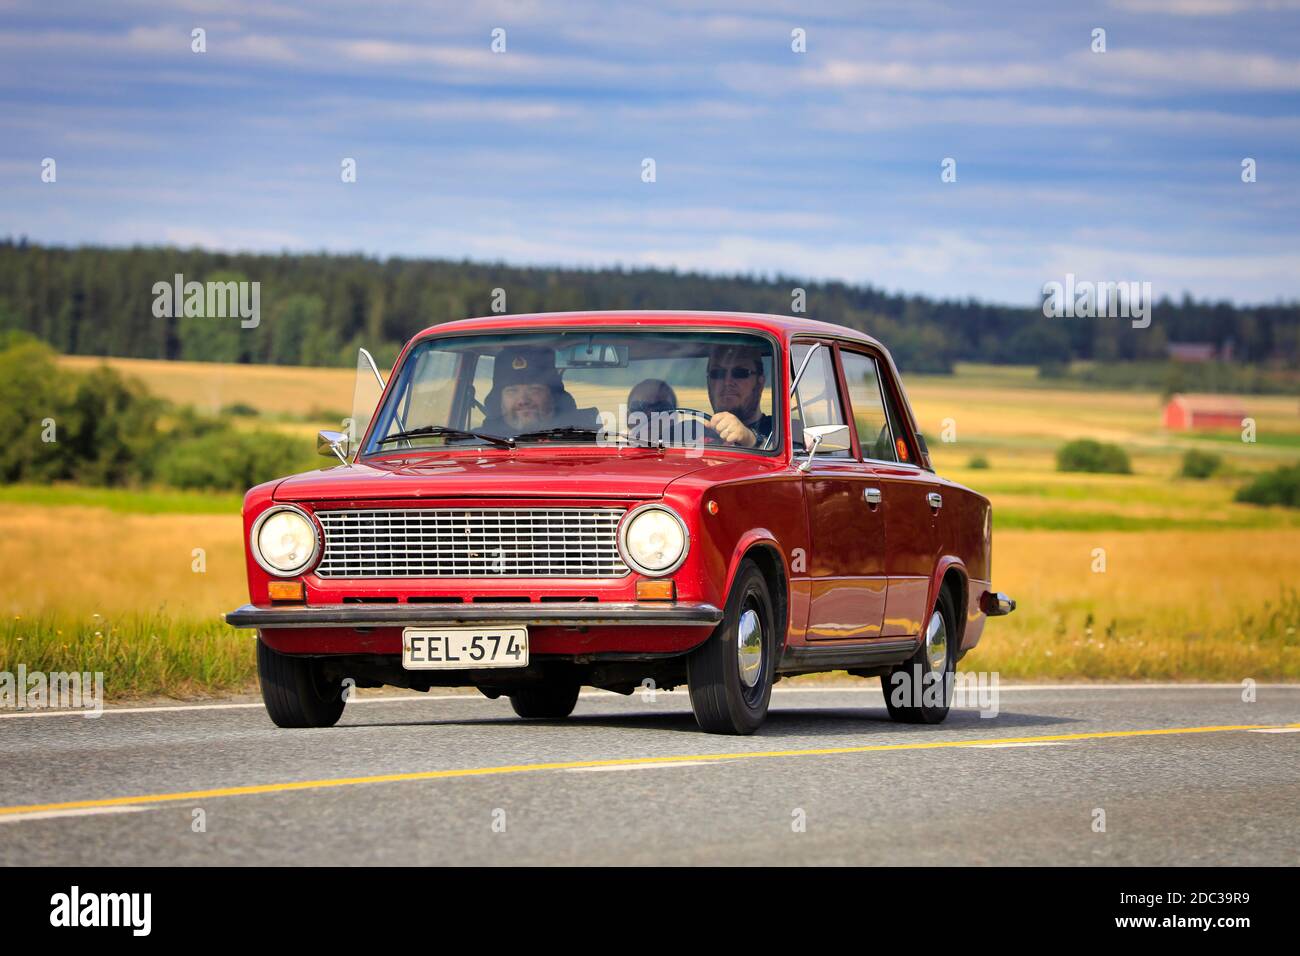 Driving red Lada 1200 on Maisemaruise 2019 car cruise. Lada 1200 was manufactured by the Russian AvtoVAZ in 1970-88. Vaulammi, Finland. Aug 3, 2019. Stock Photo